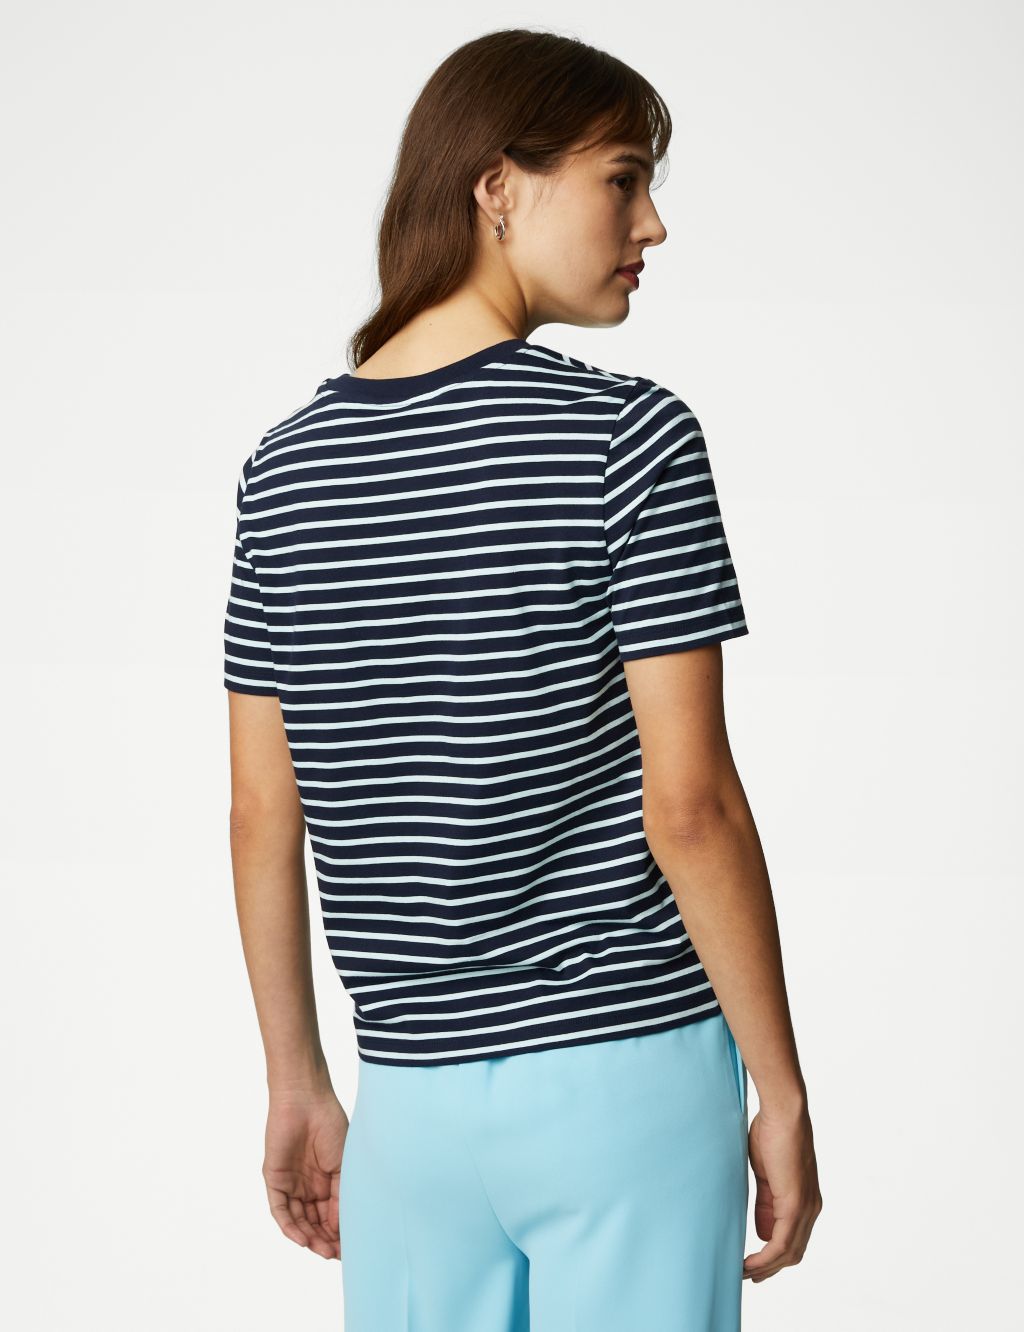 Pure Cotton Striped Everyday Fit T-Shirt image 5